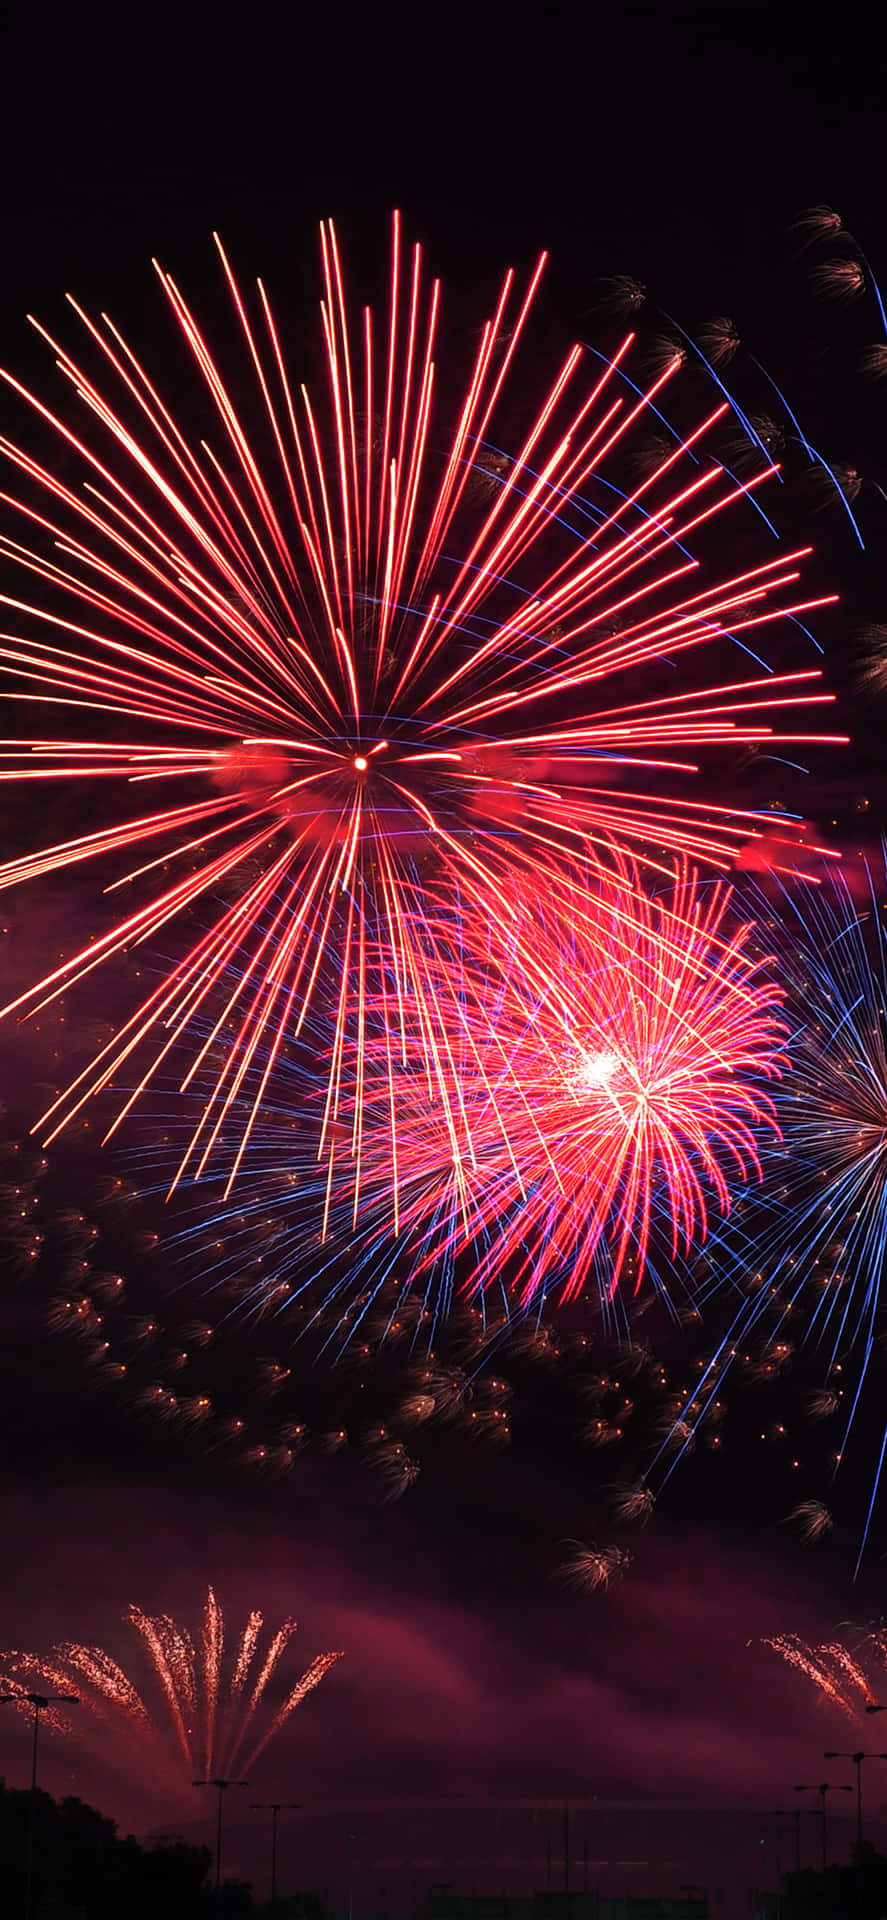 Brighten up the Night Sky with Exciting Fireworks